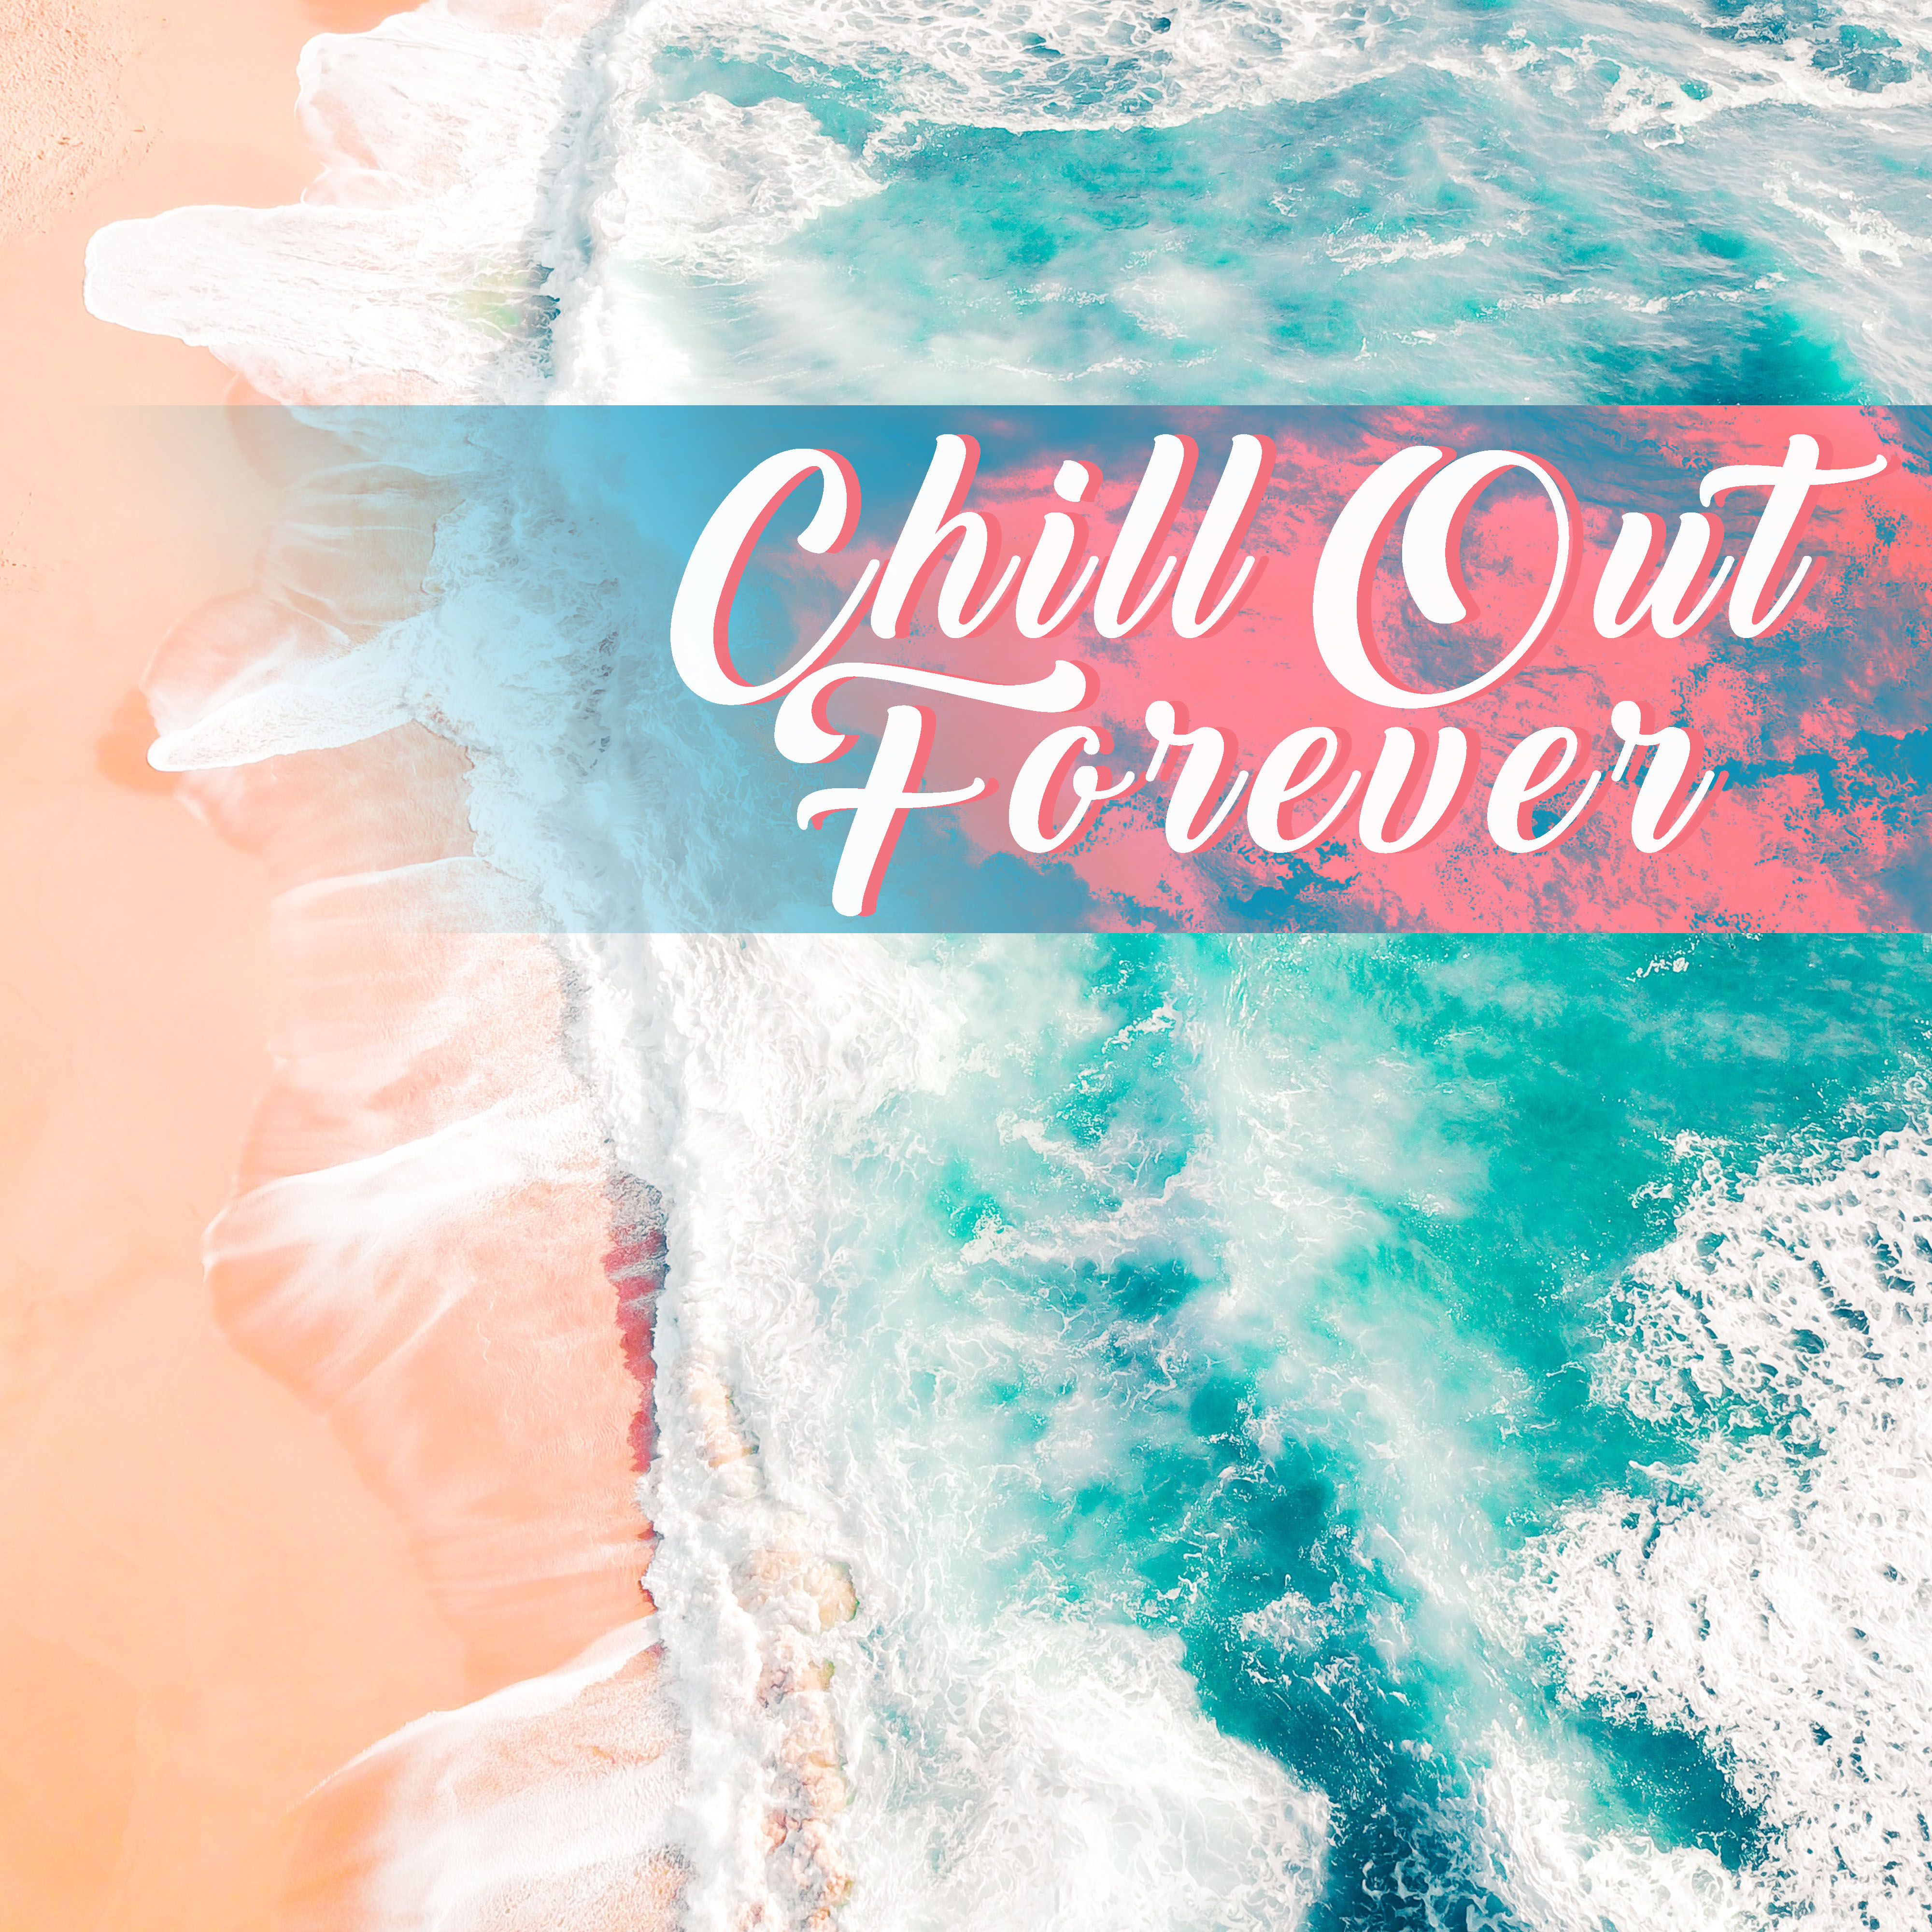 Chill Out Forever  Soft Vibes, Sunshine Beats, Deep Lounge, Relax, Beach Chill, Summertime, Peaceful Music to Calm Down